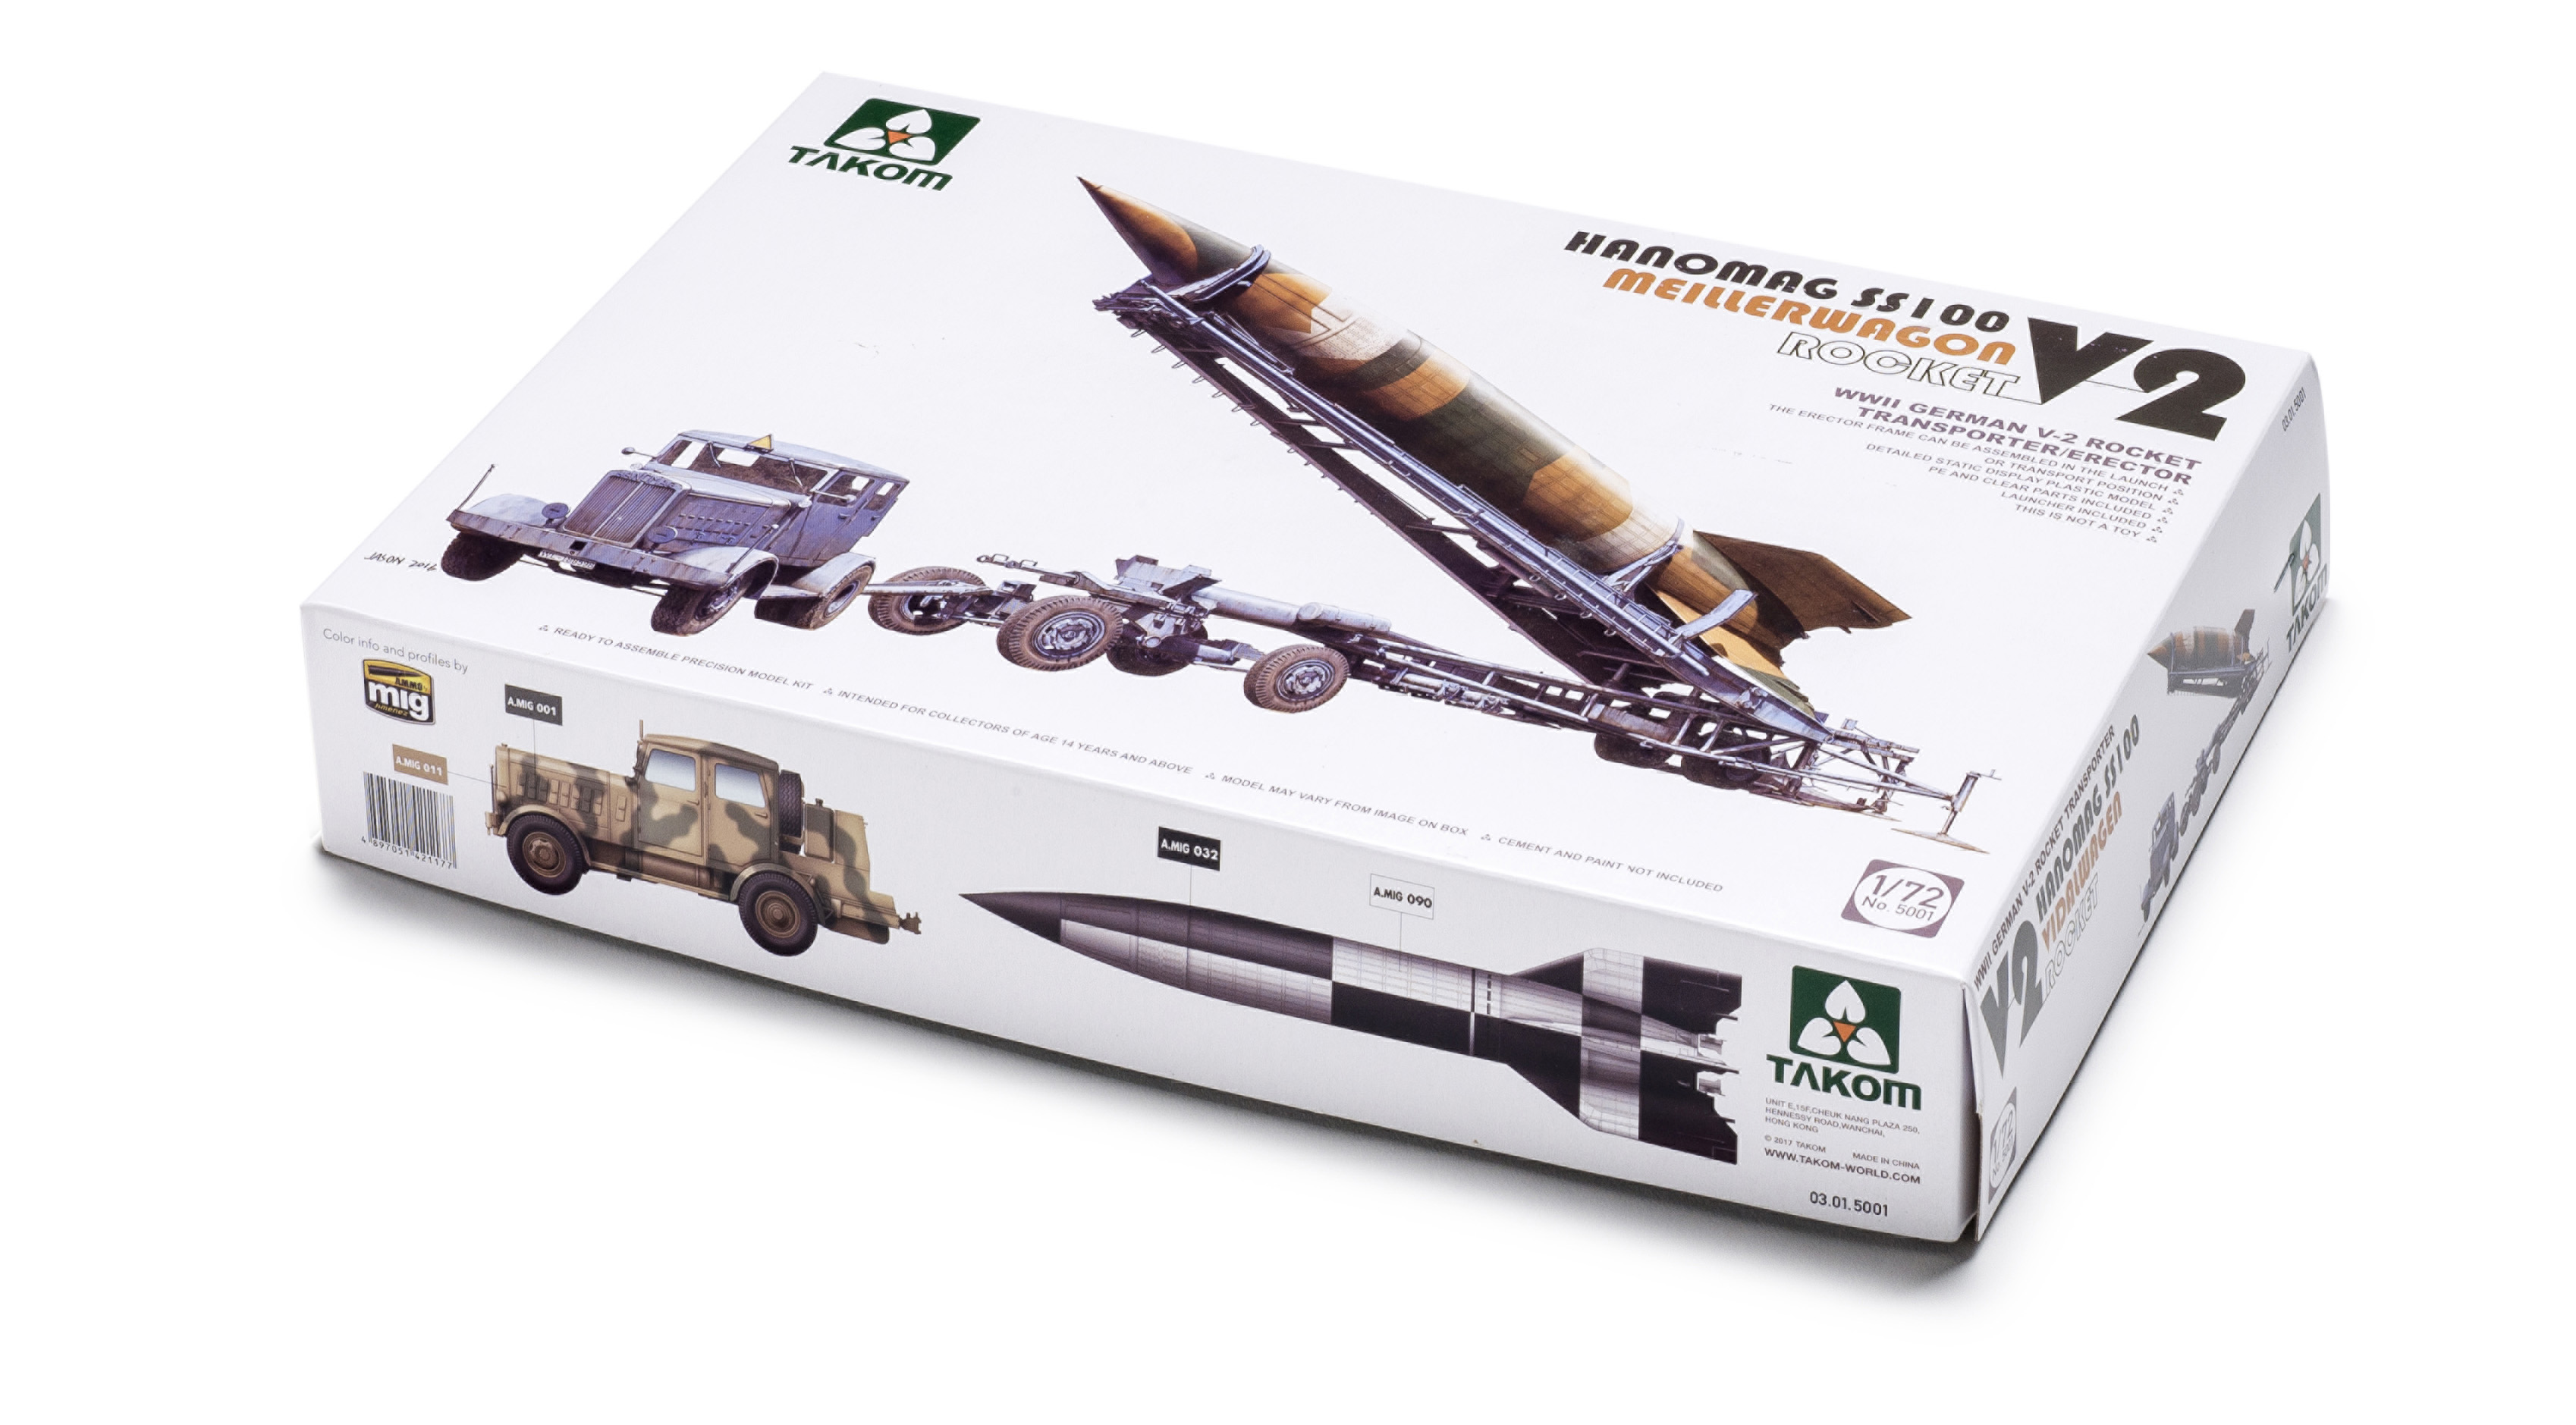 Build review of the Takom V-2 Meillerwagen and Hanomag SS100 scale 